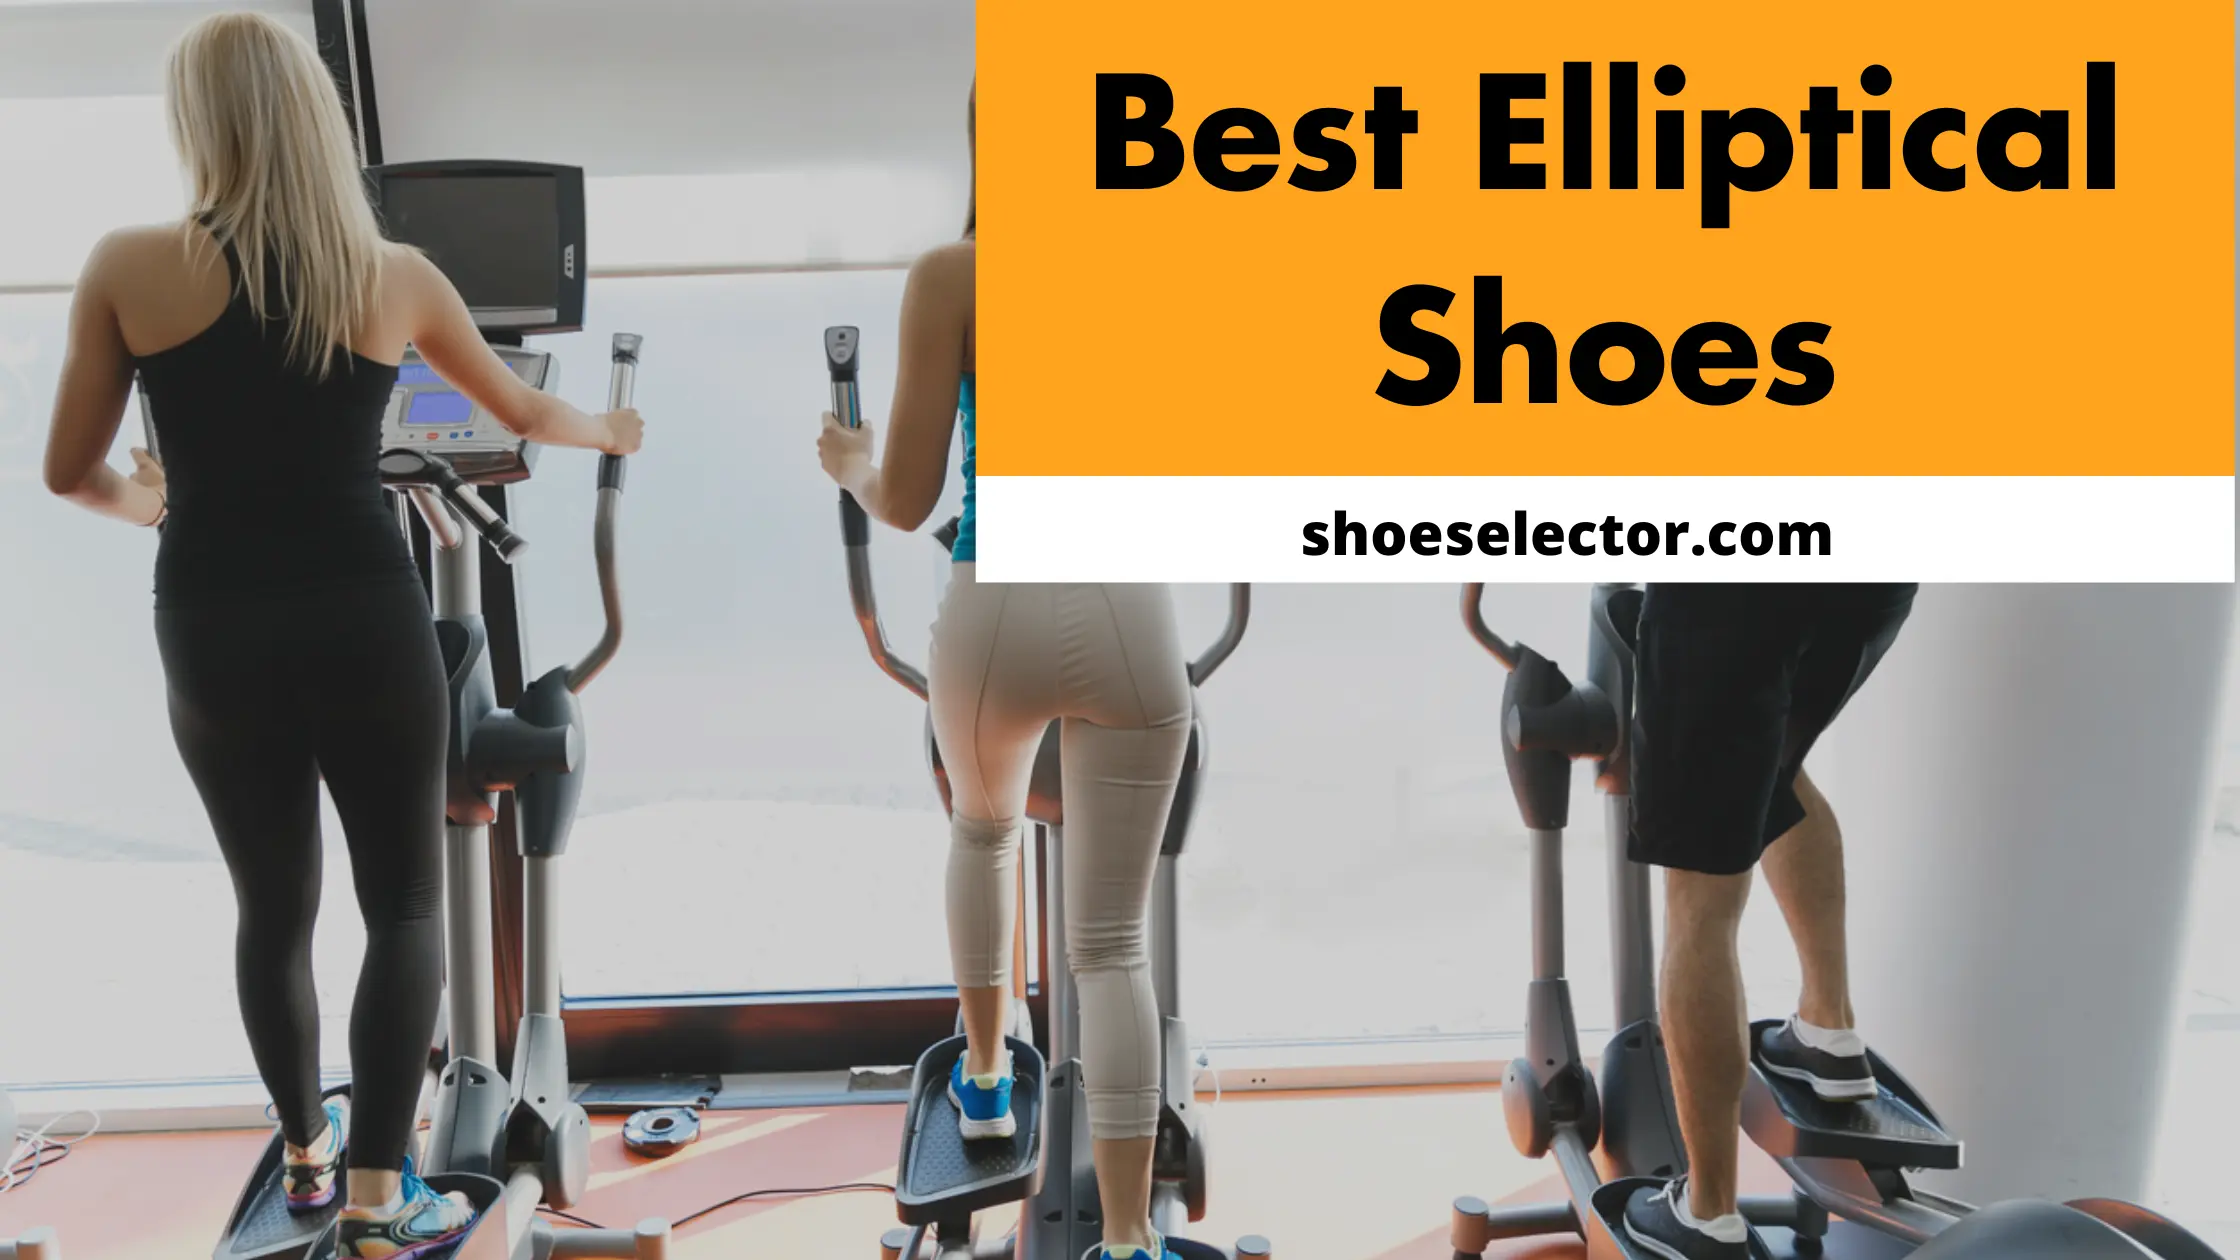 Best Elliptical Shoes With Complete Shopping Tips